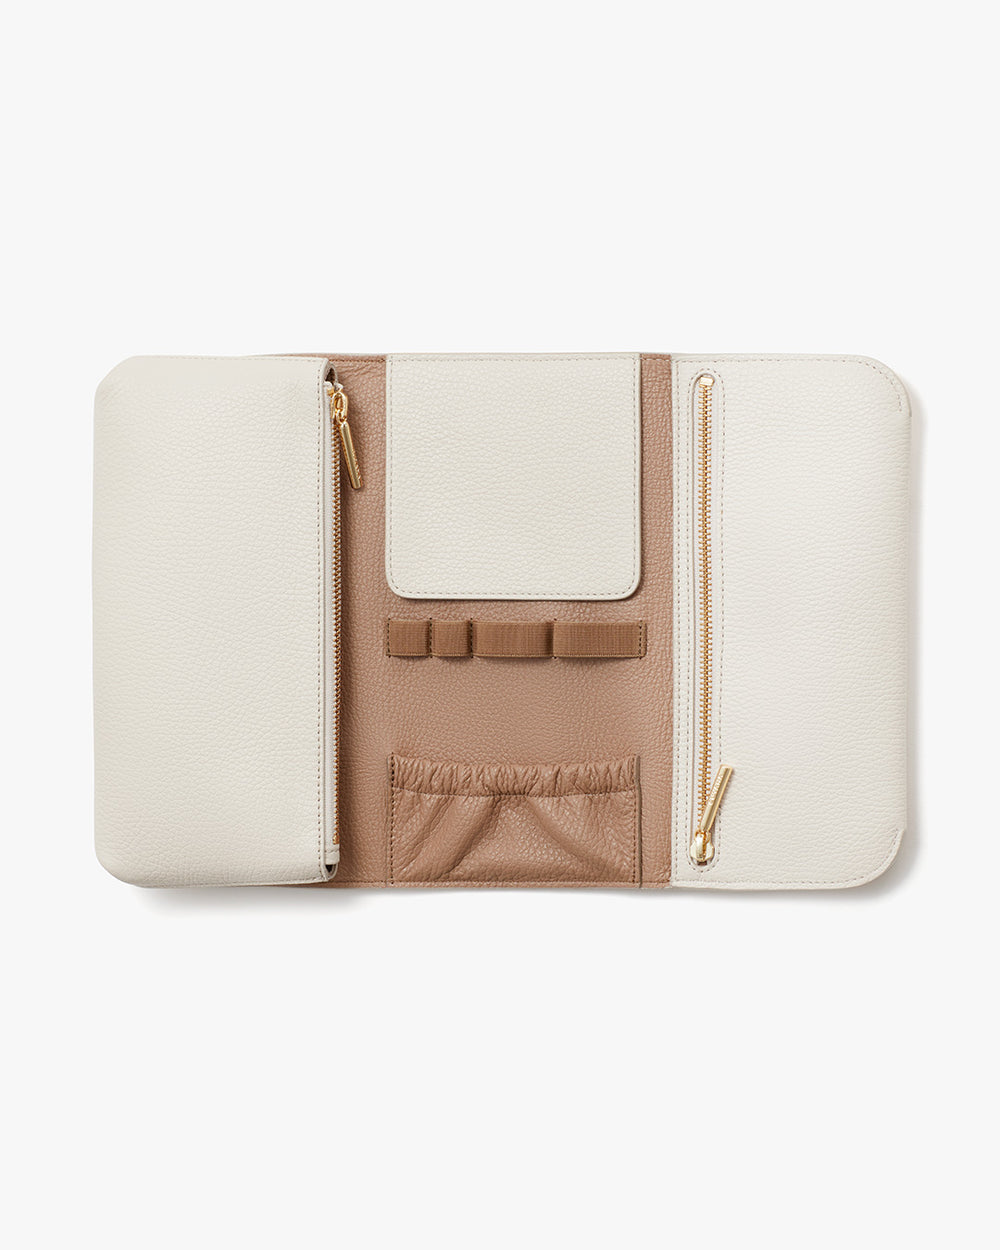 Wallet with multiple compartments and zippers open on a flat surface.